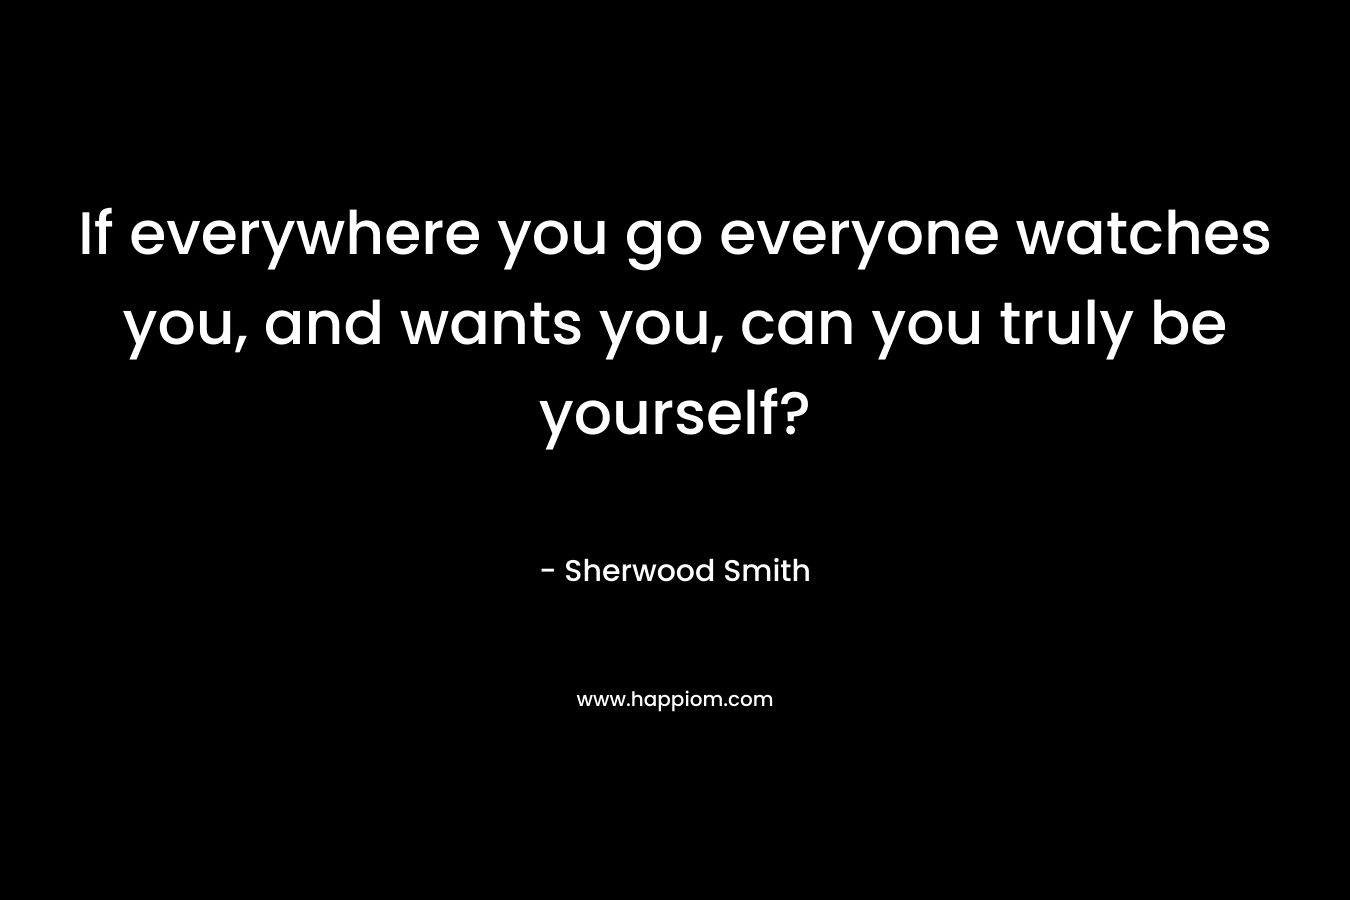 If everywhere you go everyone watches you, and wants you, can you truly be yourself? – Sherwood Smith